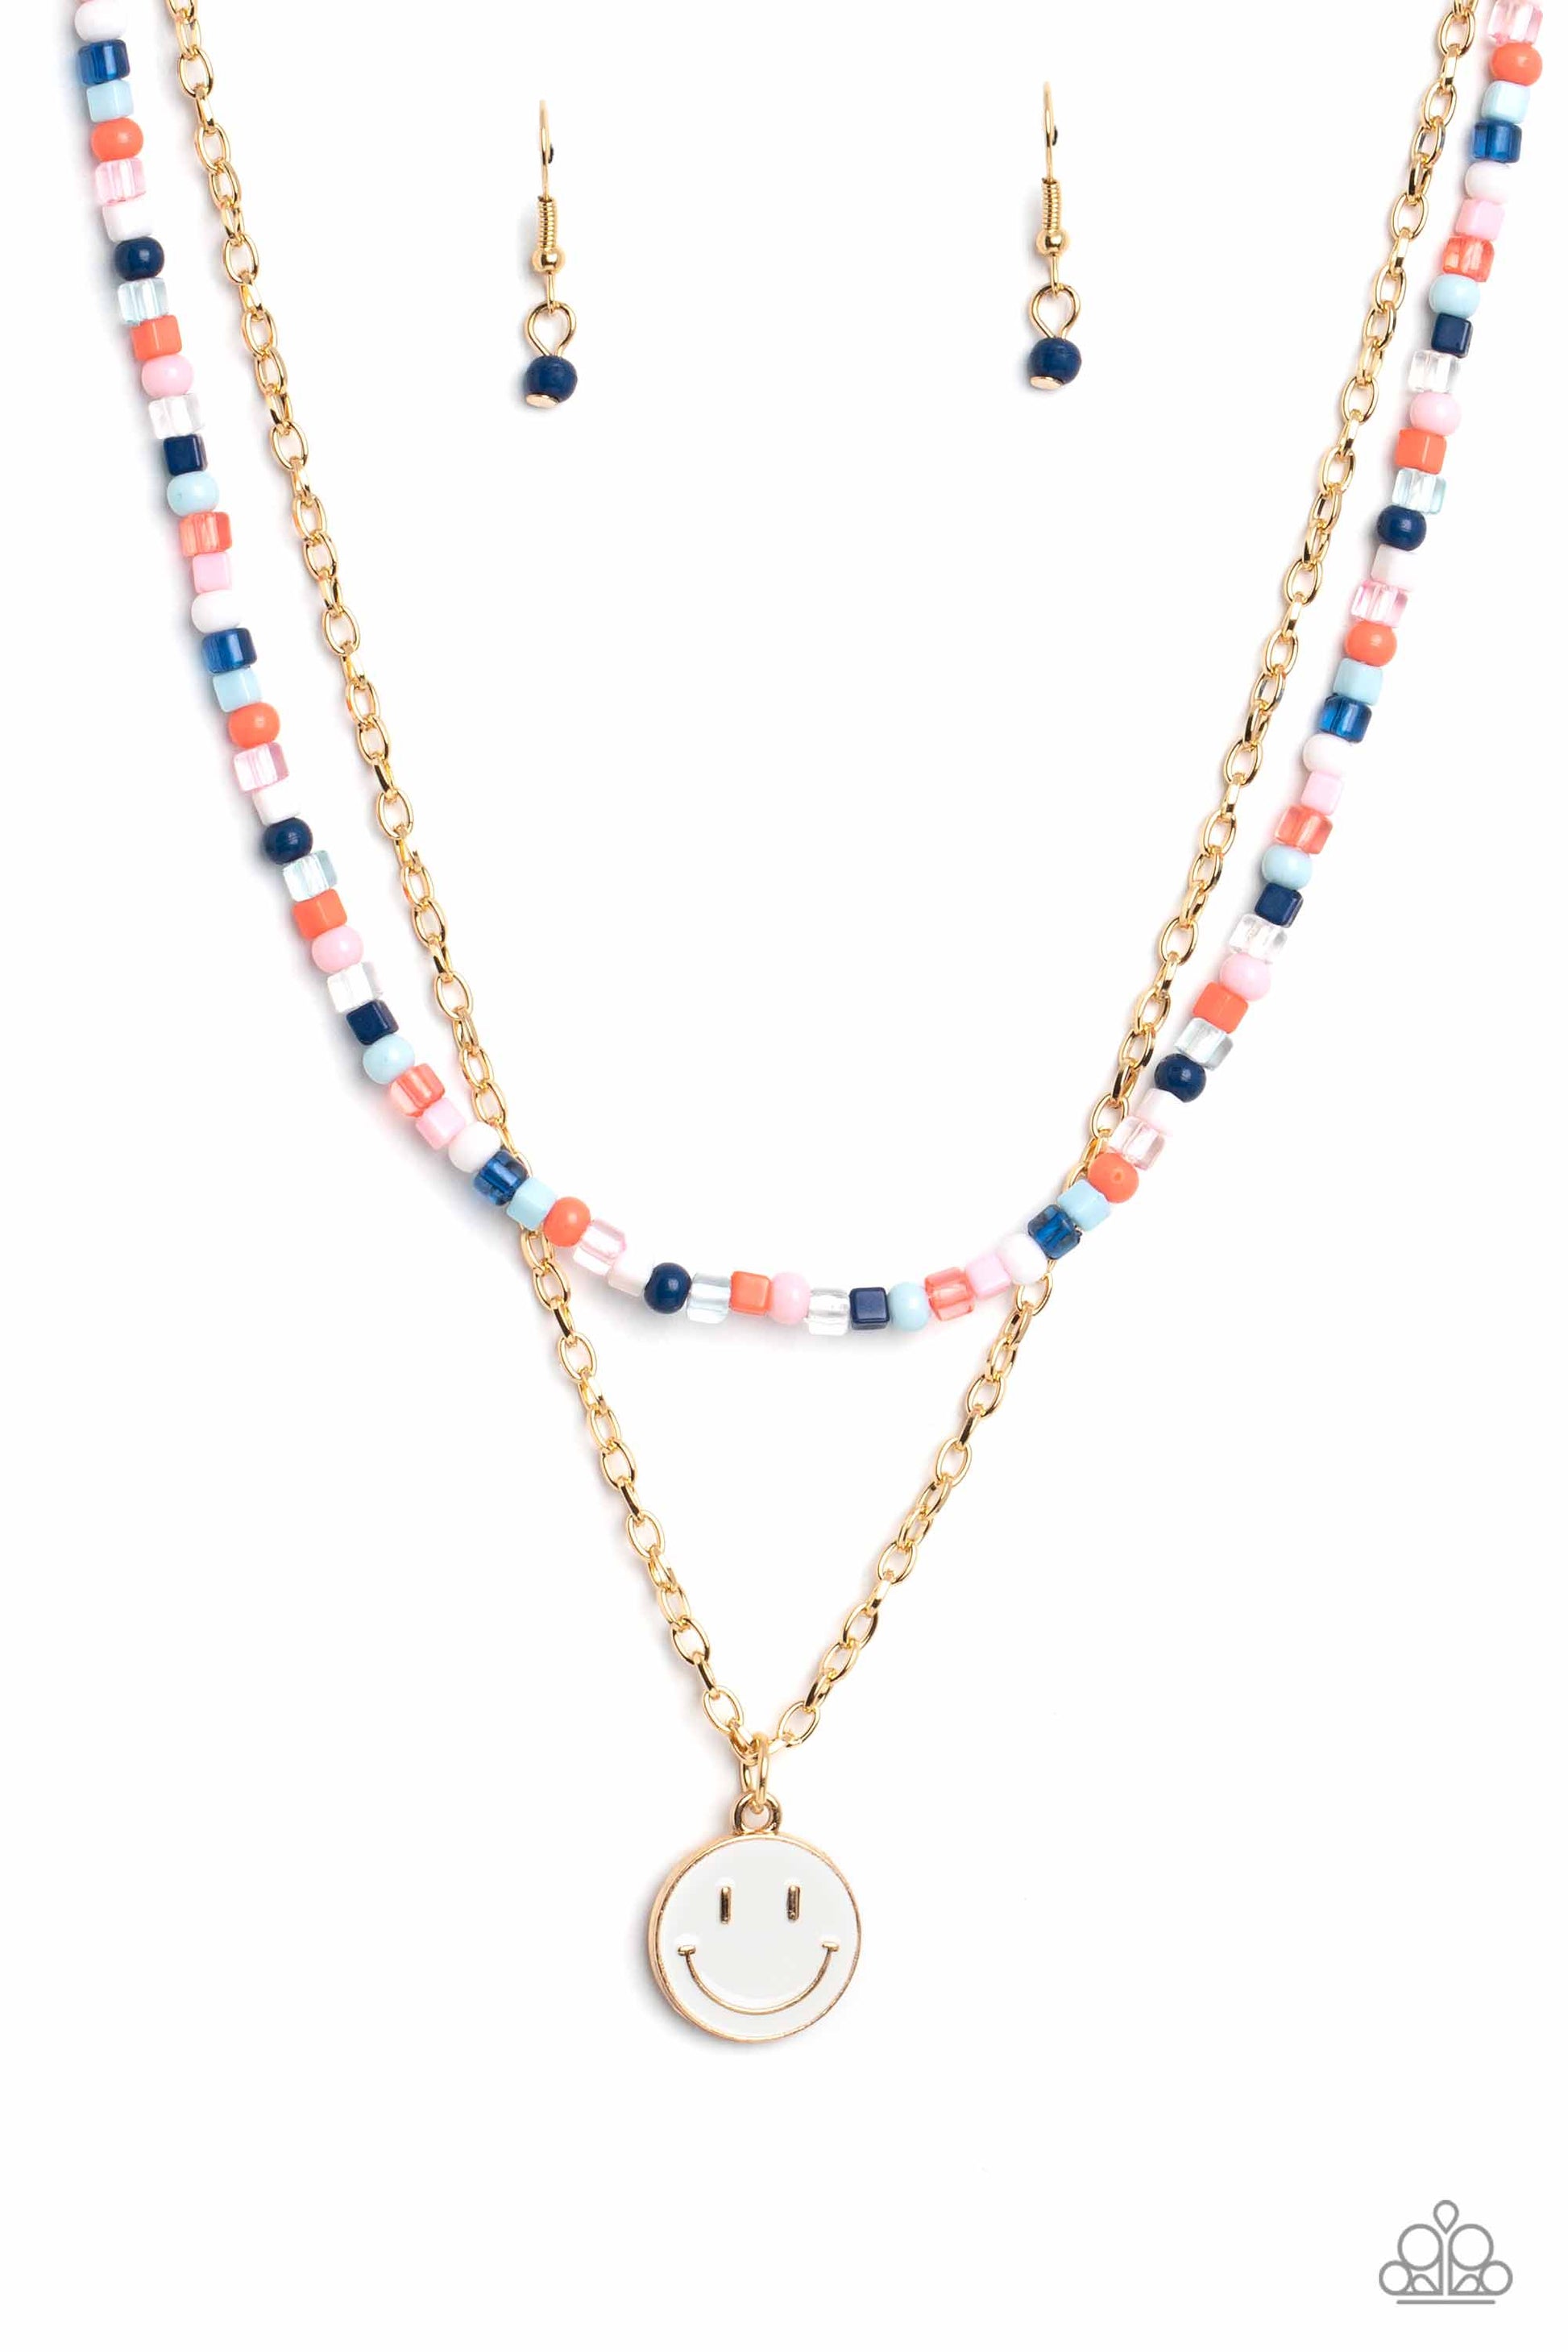 Paparazzi Accessories High School Reunion - Blue Gliding from a dainty, gold chain, a smiley face pendant stands out against a white backdrop. Completing the charismatic ensemble, a collection of seed beads in shades of Spun Sugar, baby pink, navy blue, w